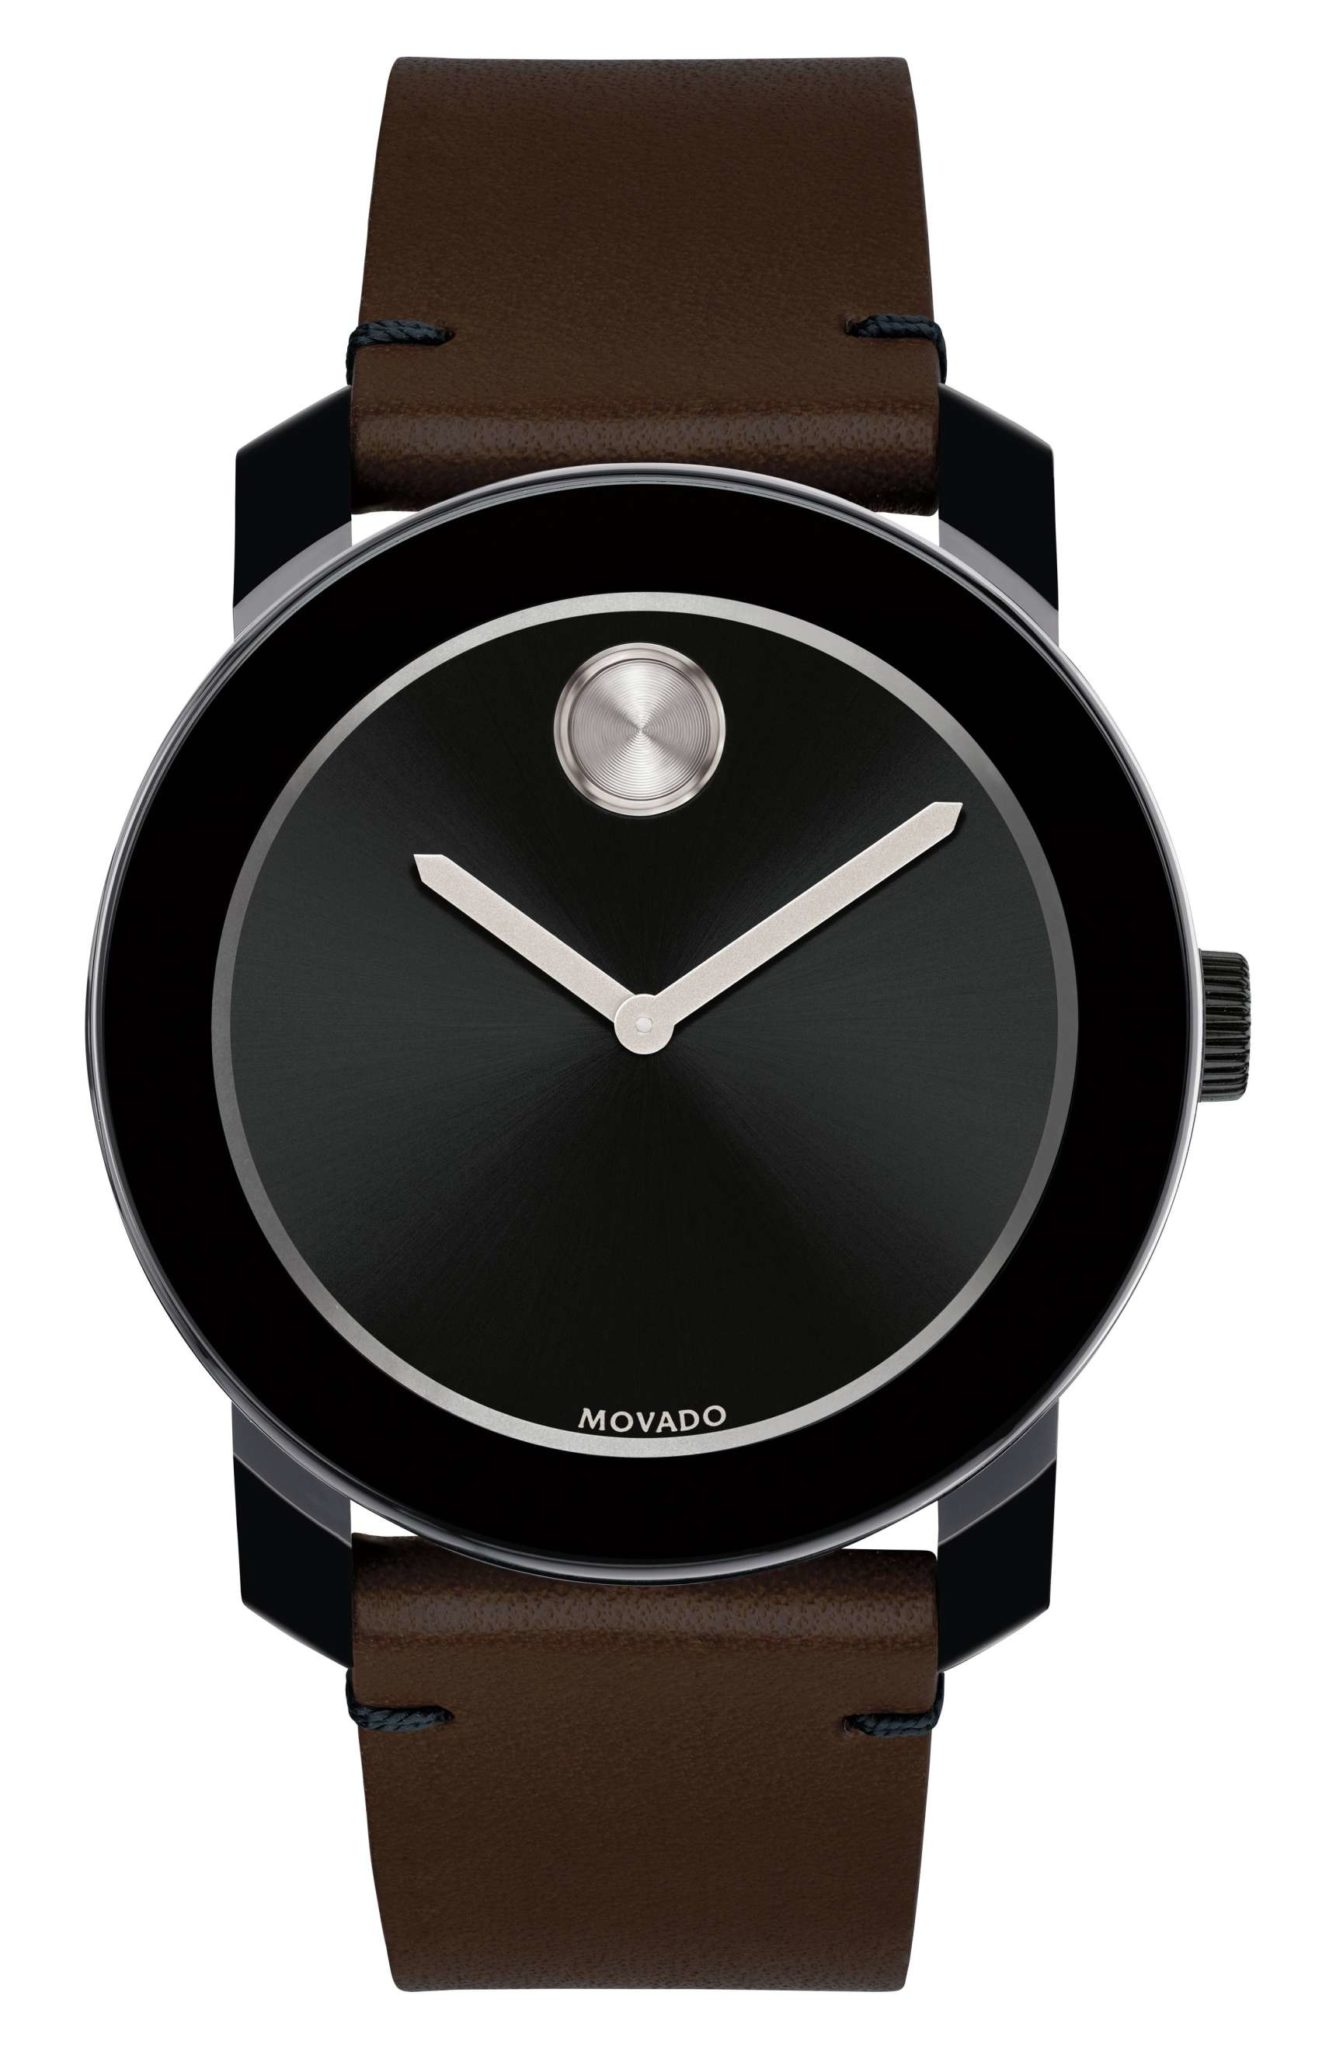 Best Men's Watches 2017: Movado Leather Strap Watch for Men 2018